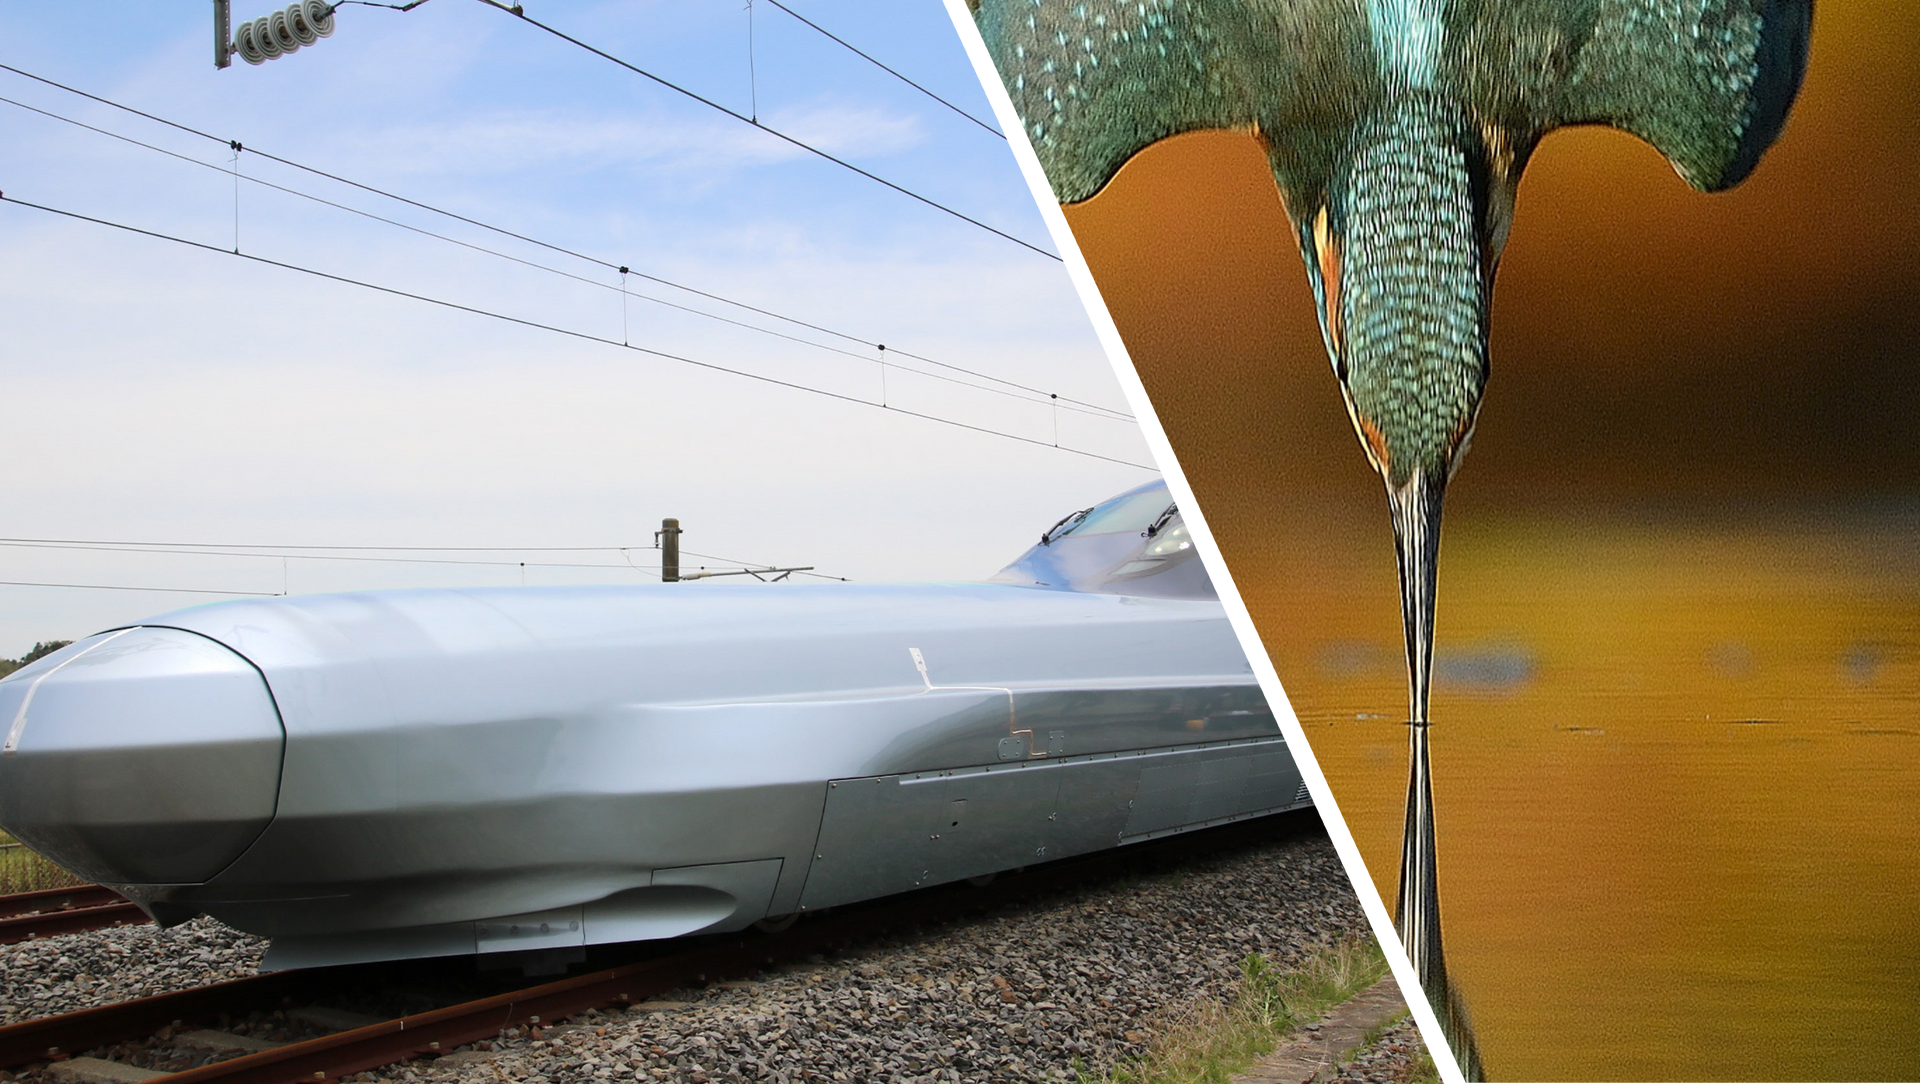 Japanese bullet train nose next to a Kingfisher bird in profile